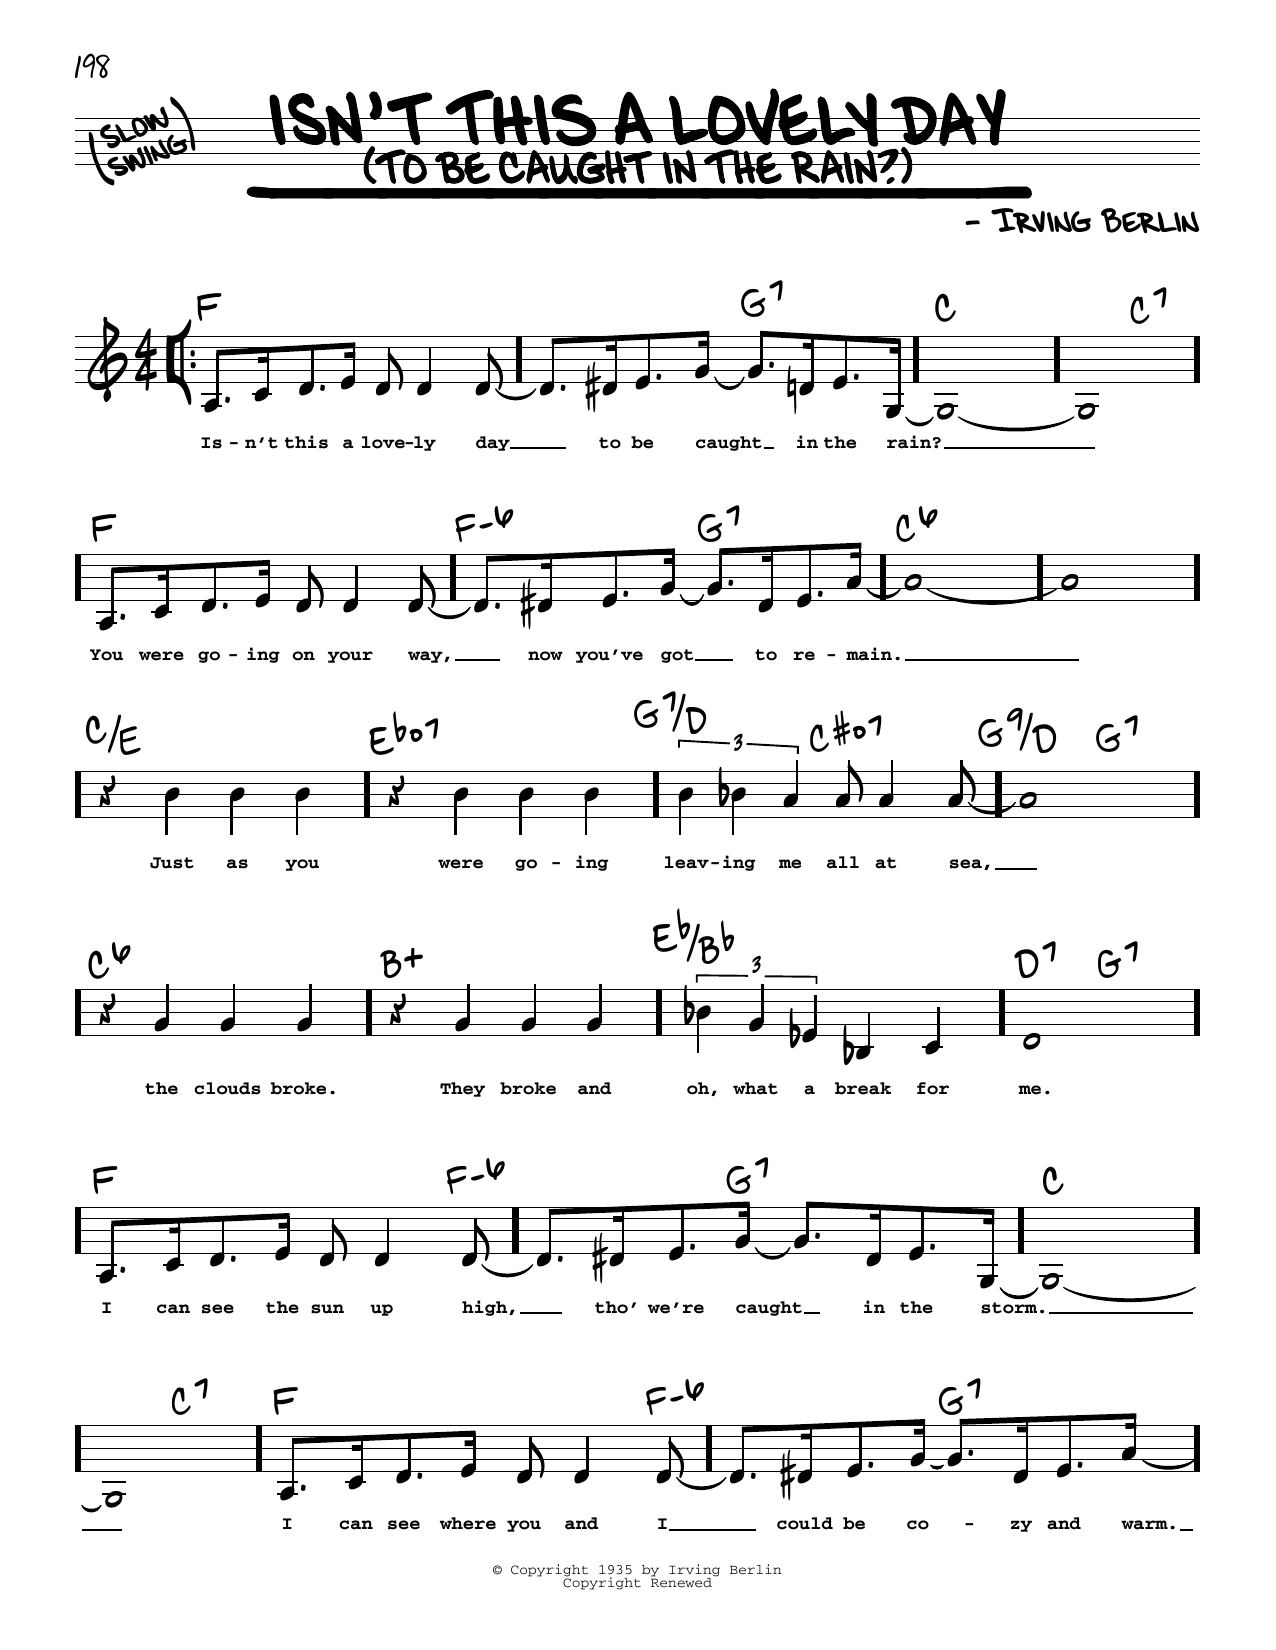 Irving Berlin Isn't This A Lovely Day (To Be Caught In The Rain?) (Low Voice) sheet music notes printable PDF score